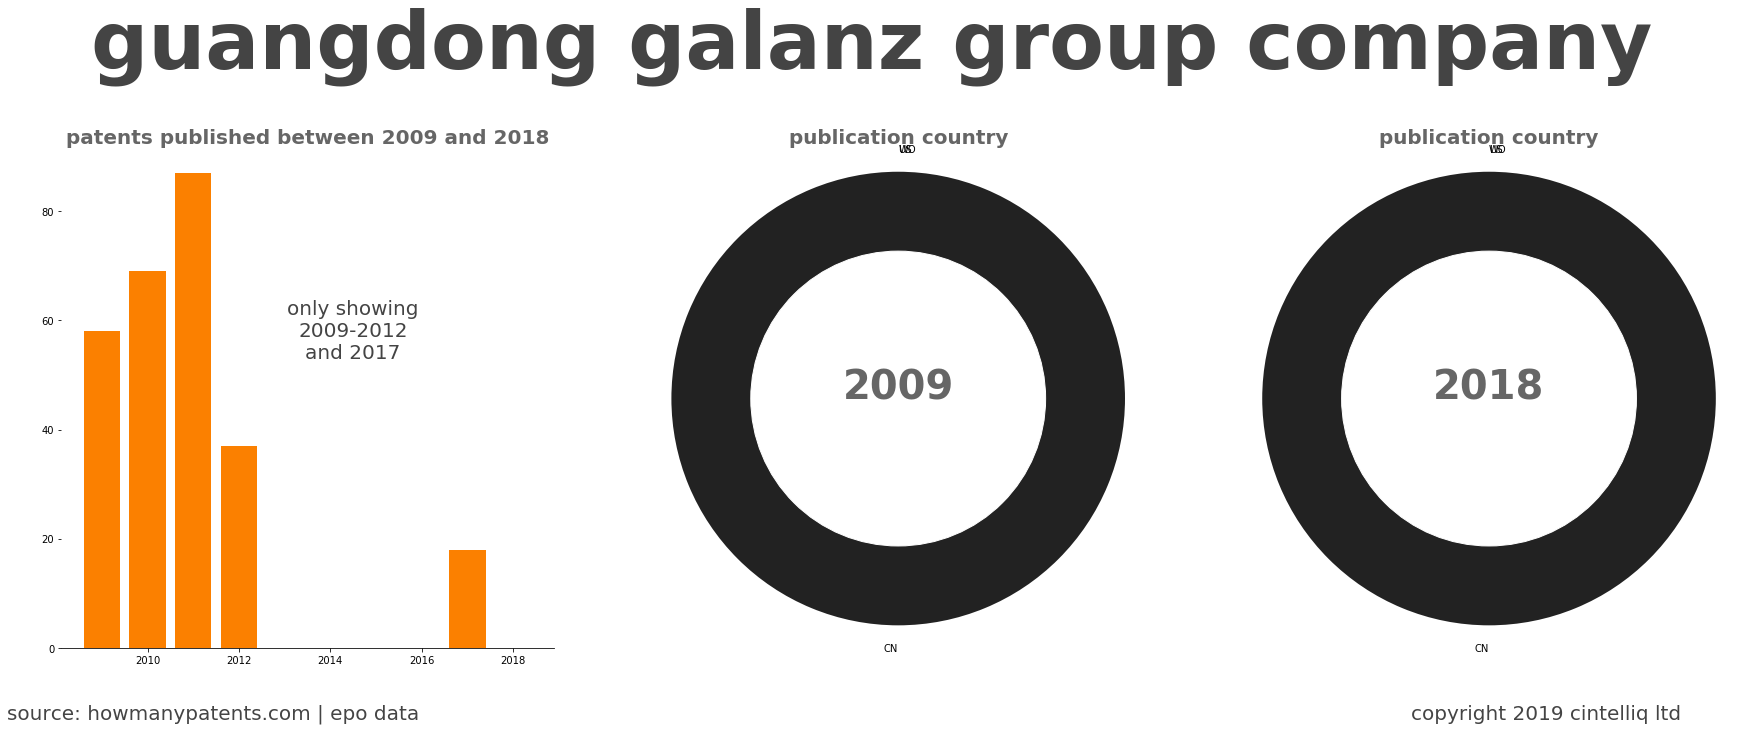 summary of patents for Guangdong Galanz Group Company